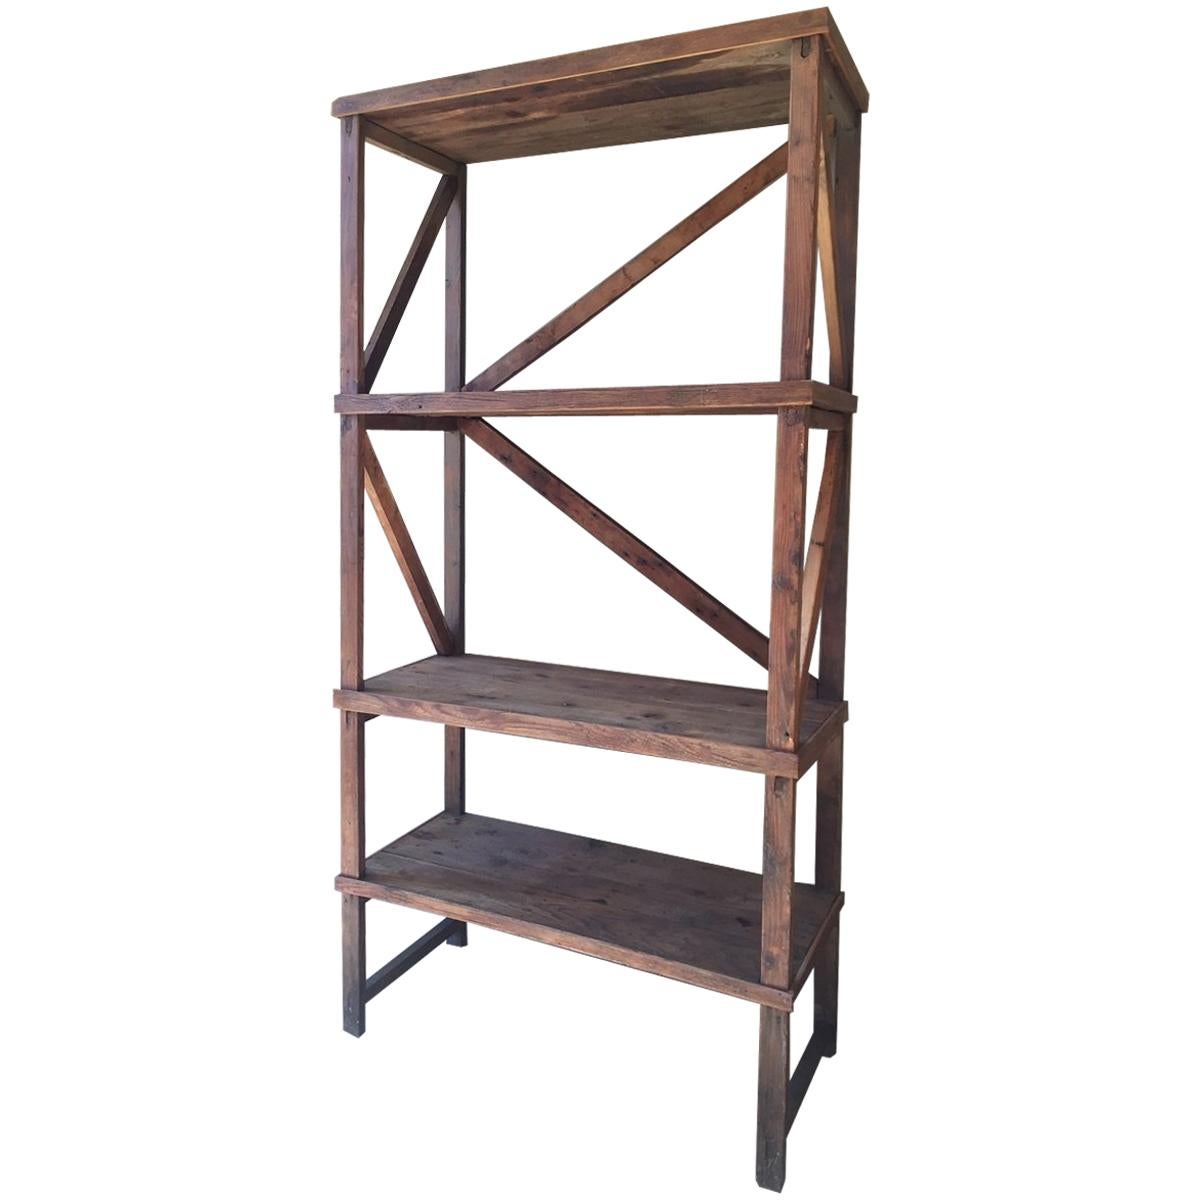 Early 20th Century Wooden Shelf Unit Industrial